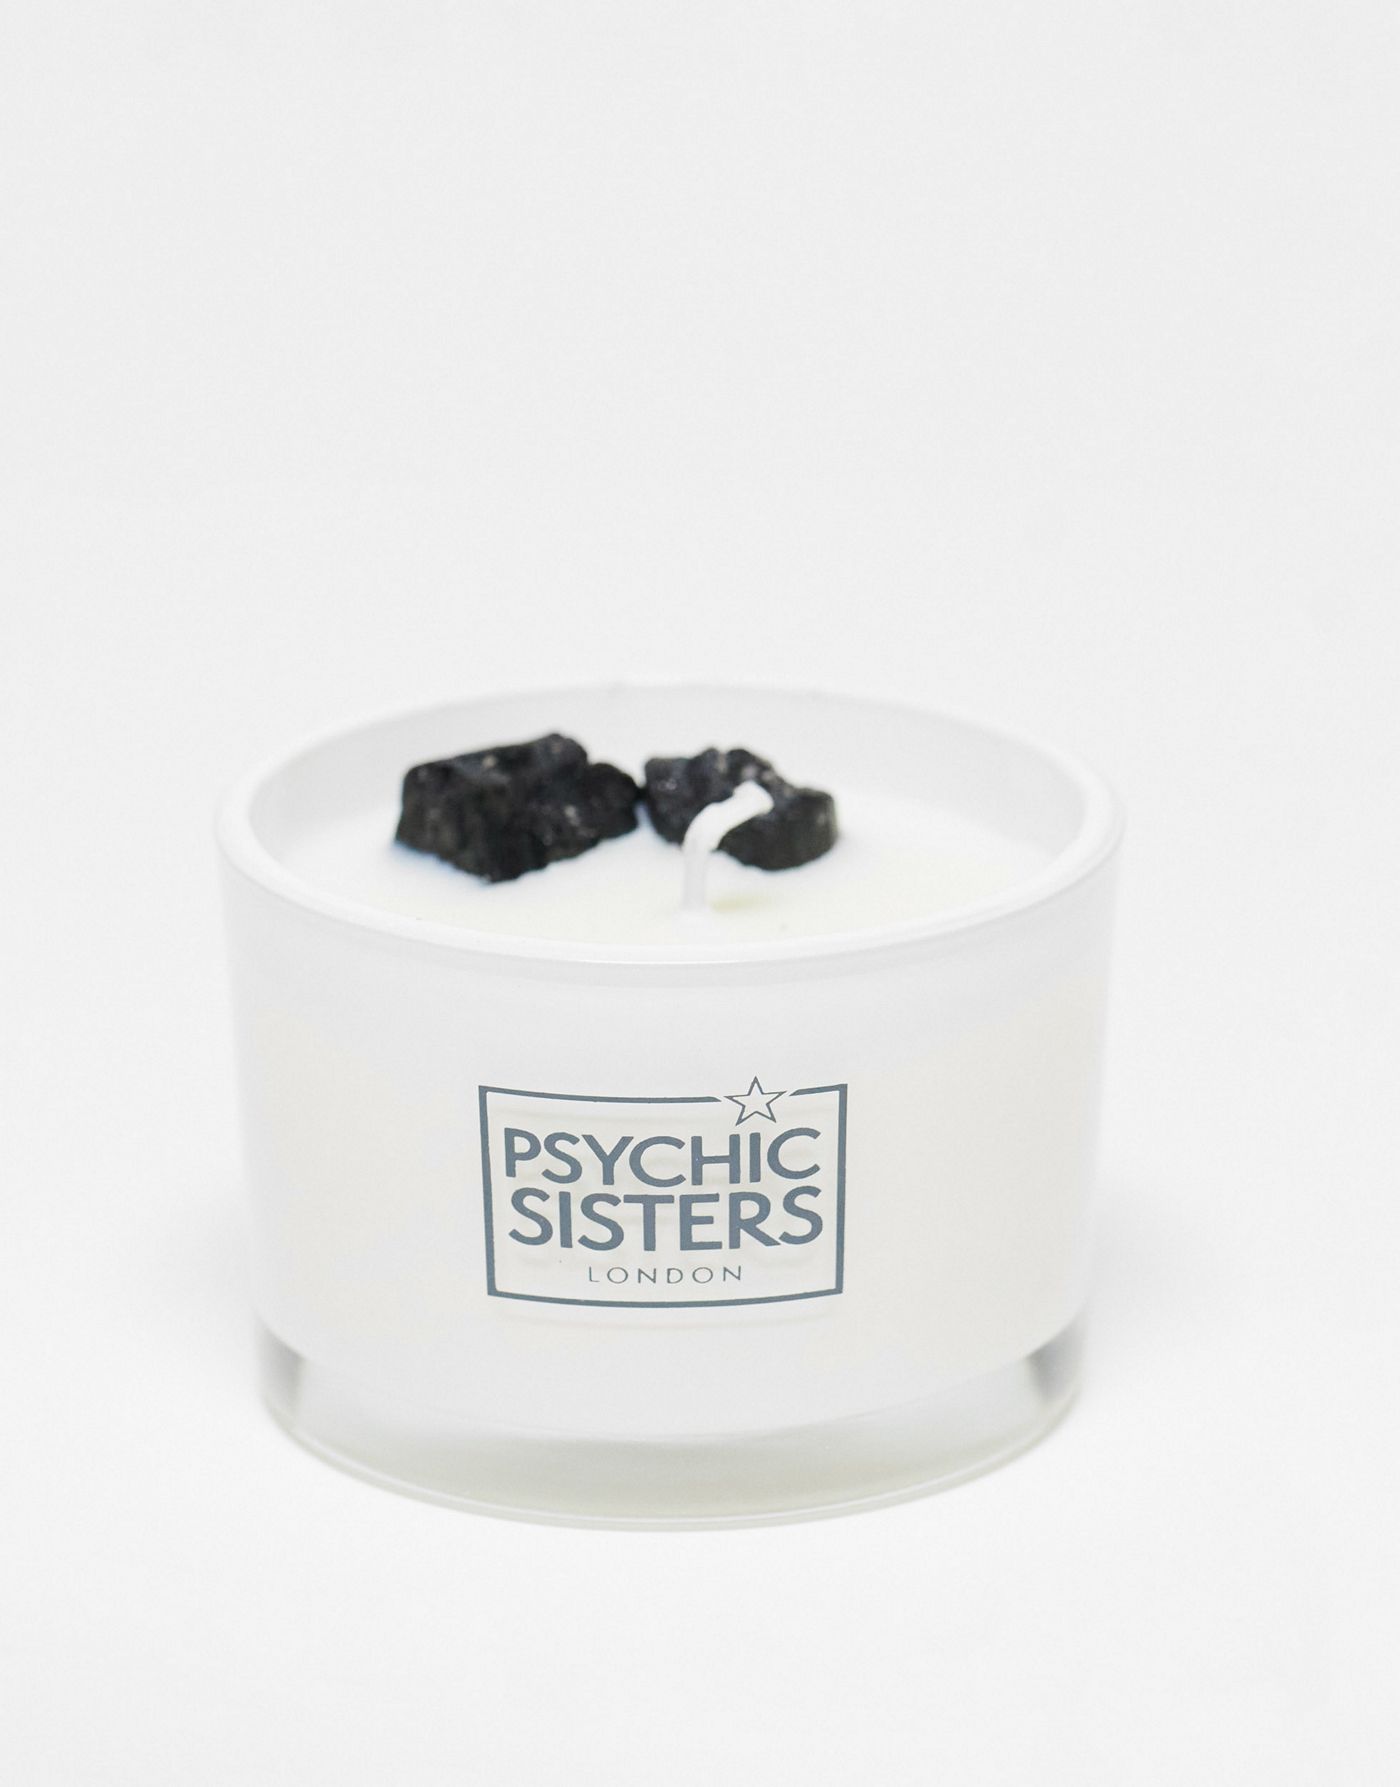 Psychic Sisters x ASOS Exclusive Black Obsidian Gemstone Candle 100g